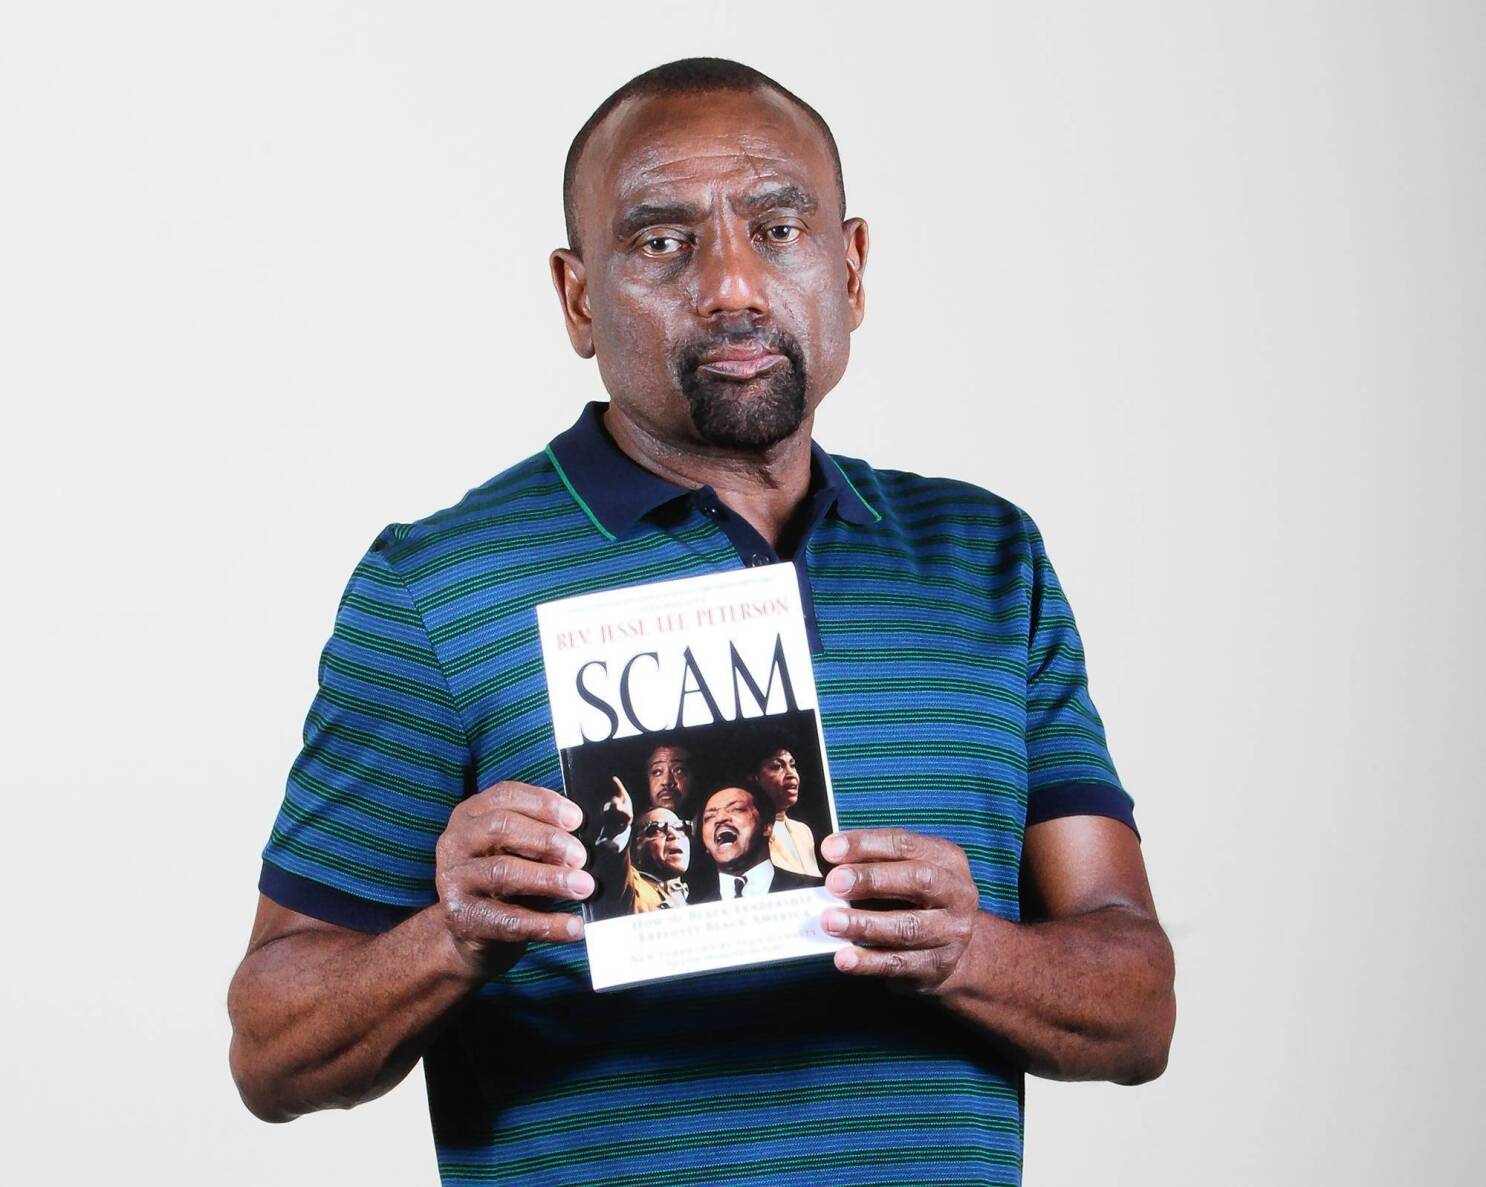 Jesse Lee Peterson, tea'd off in South . - Los Angeles Times